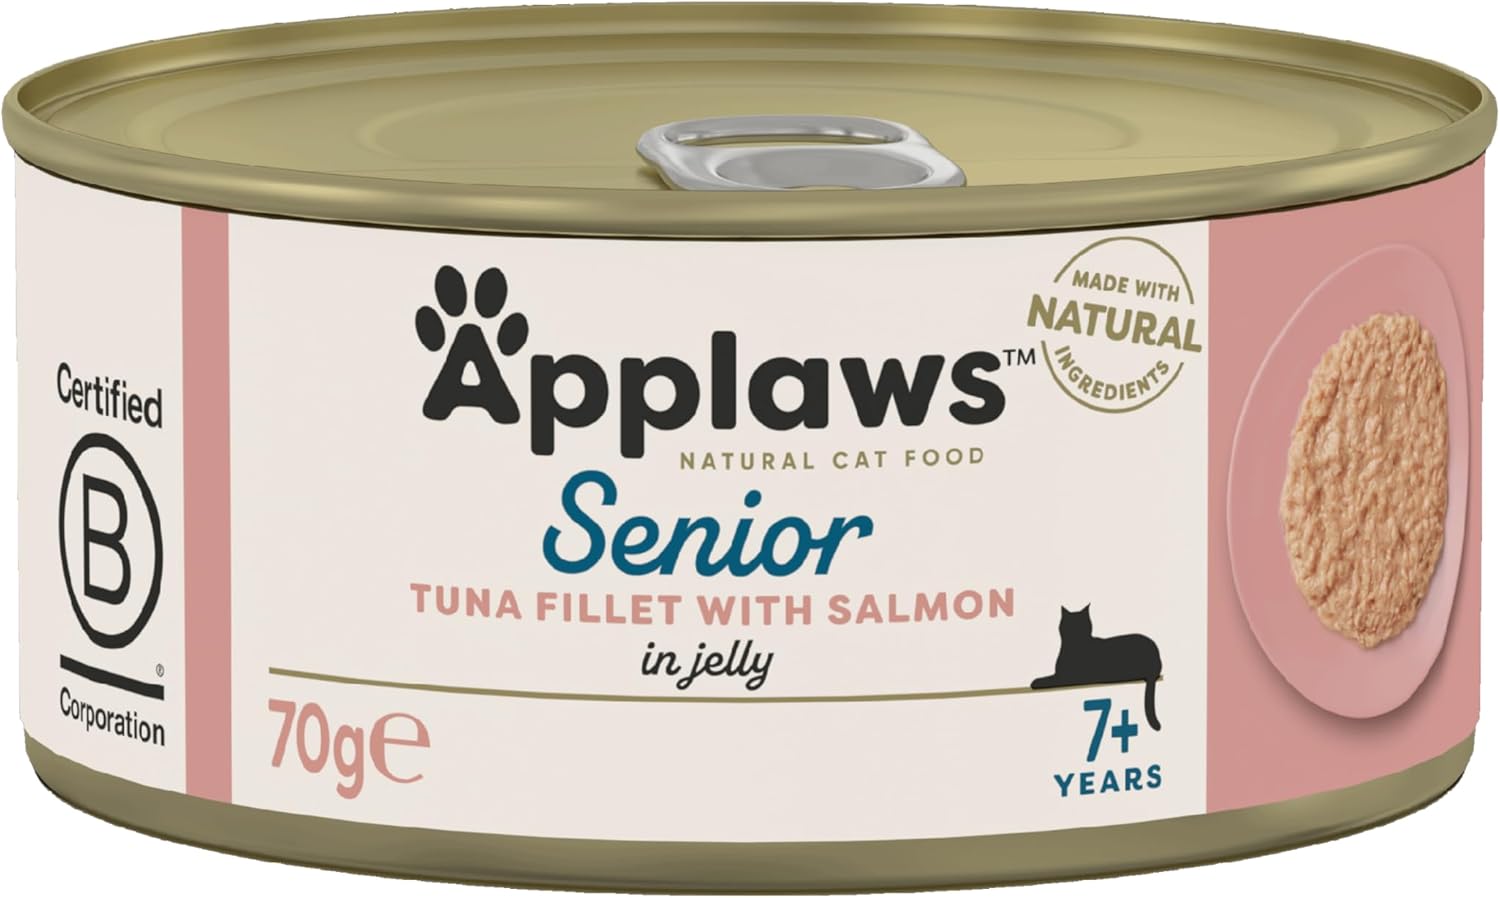 Applaws Natural Senior Wet Cat Food,Tuna with Salmon in a Soft Mousse Jelly 70g Tin (Pack of 24 x 70g Tins)?1328CE-A